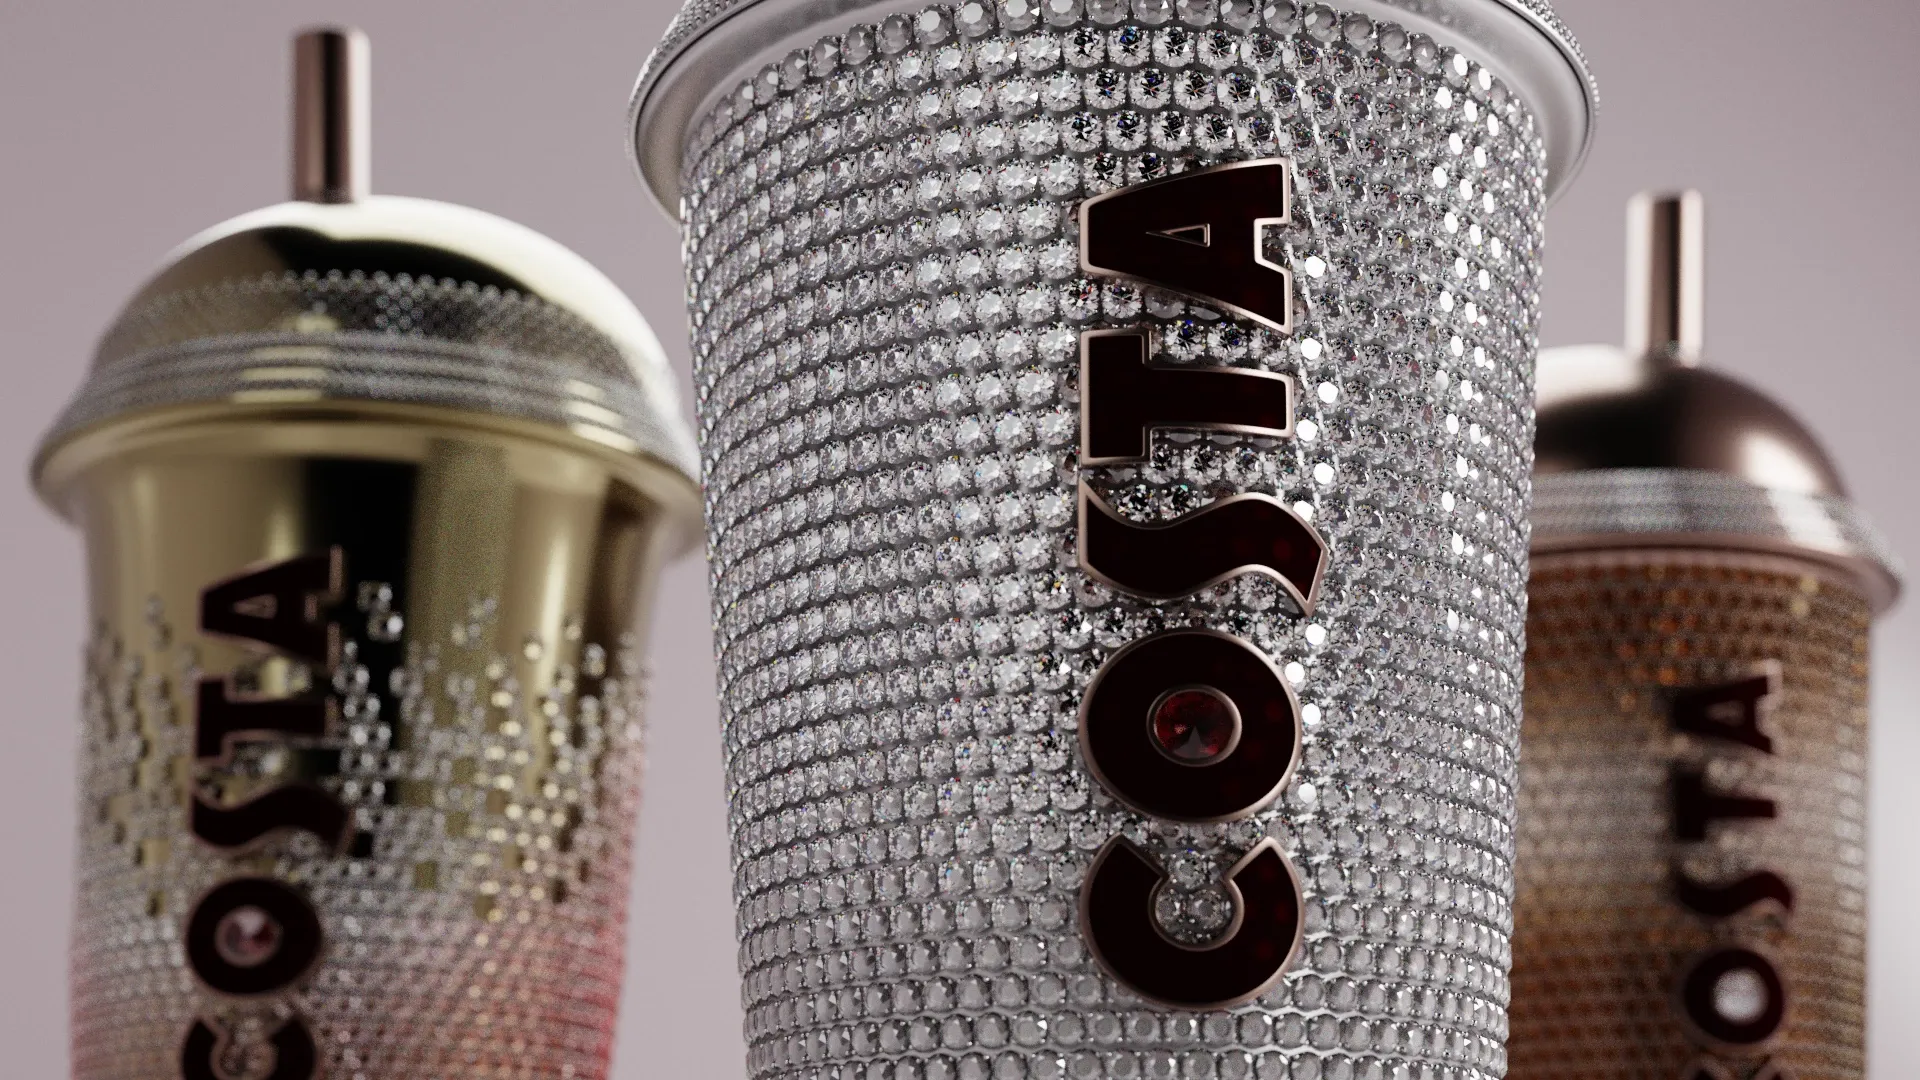 a rendered image of three Costa Coffee cups with lids and straws in precious metal with diamonds, with different designs on each cup